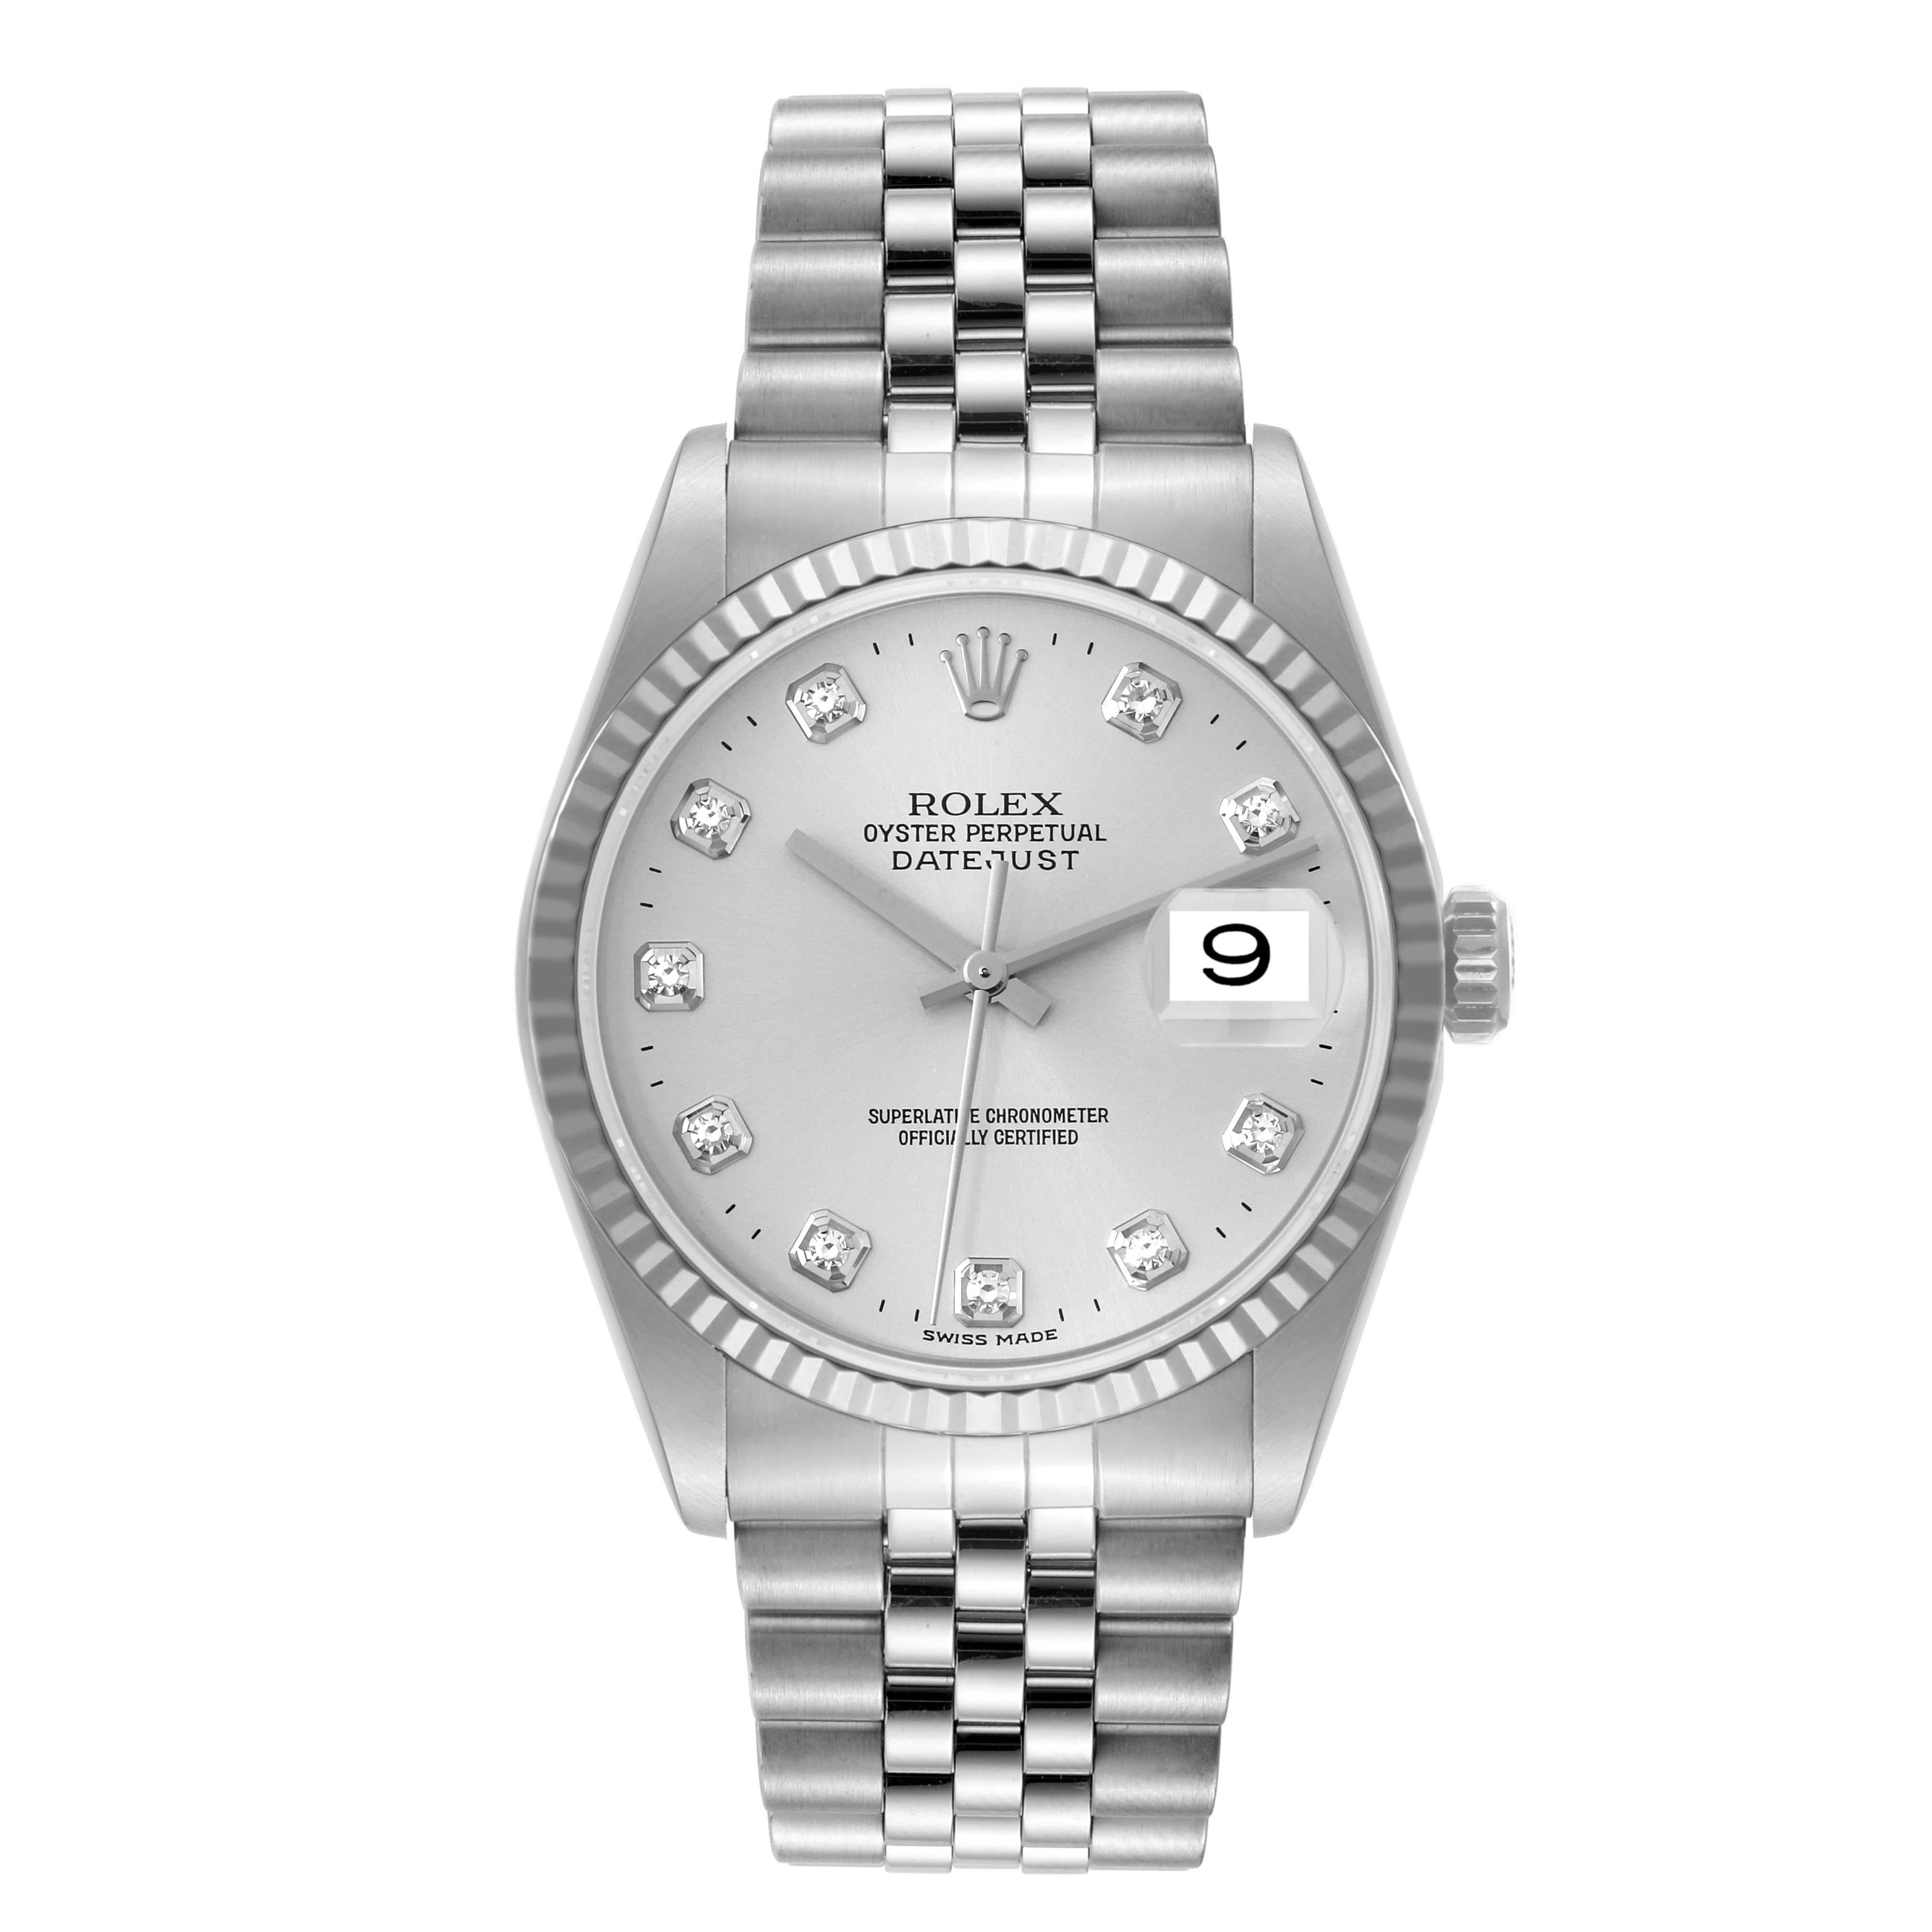 Rolex Datejust Steel White Gold Diamond Dial Mens Watch 16234. Officially certified chronometer self-winding movement. Stainless steel oyster case 36.0 mm in diameter. Rolex logo on a crown. 18k white gold fluted bezel. Scratch resistant sapphire